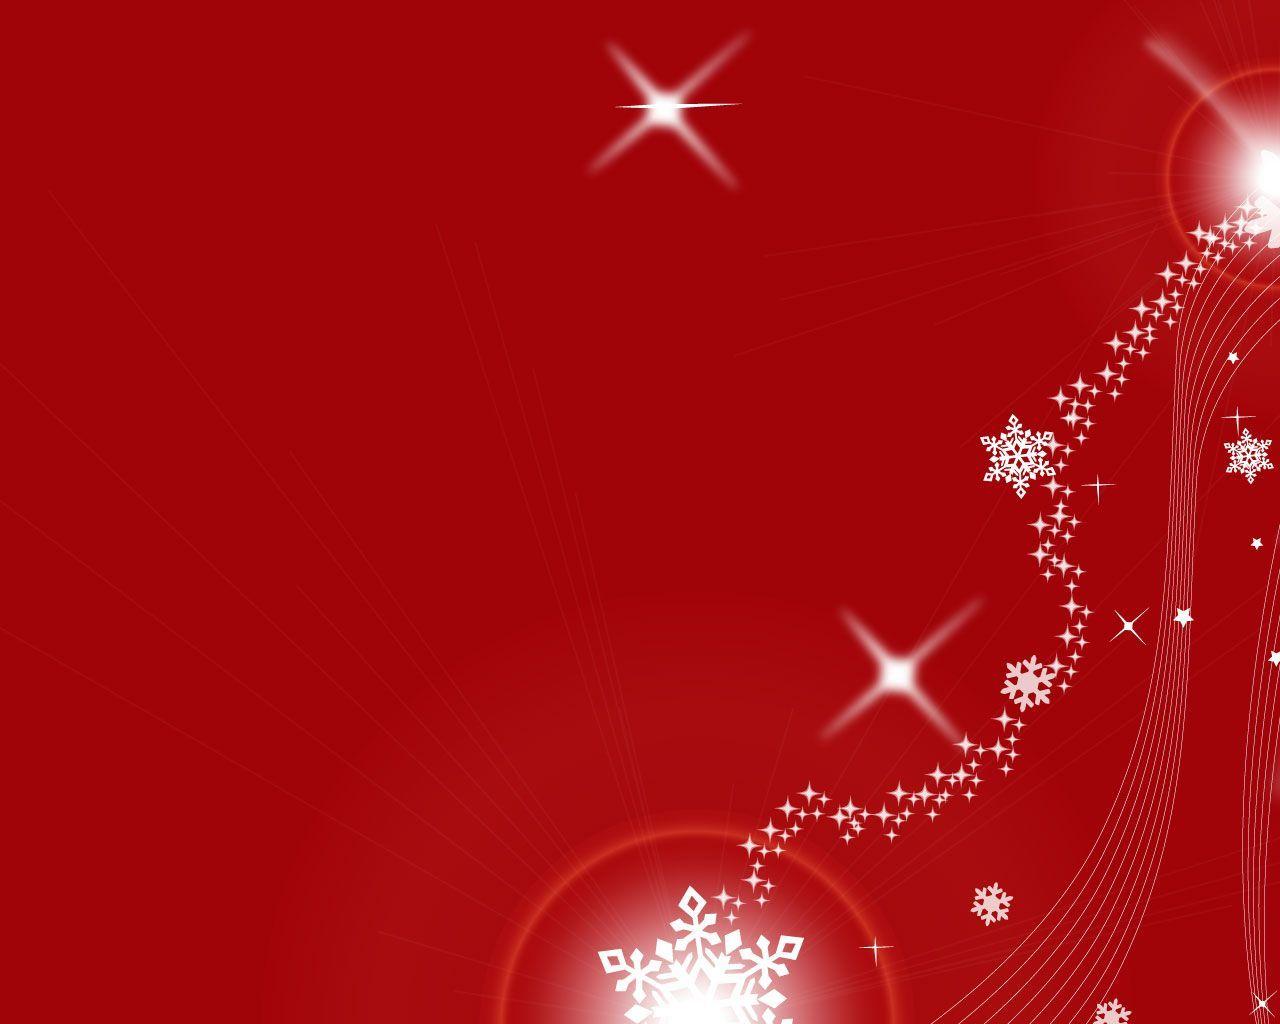 Animated Christmas PowerPoint Slides. Free Christian Wallpaper